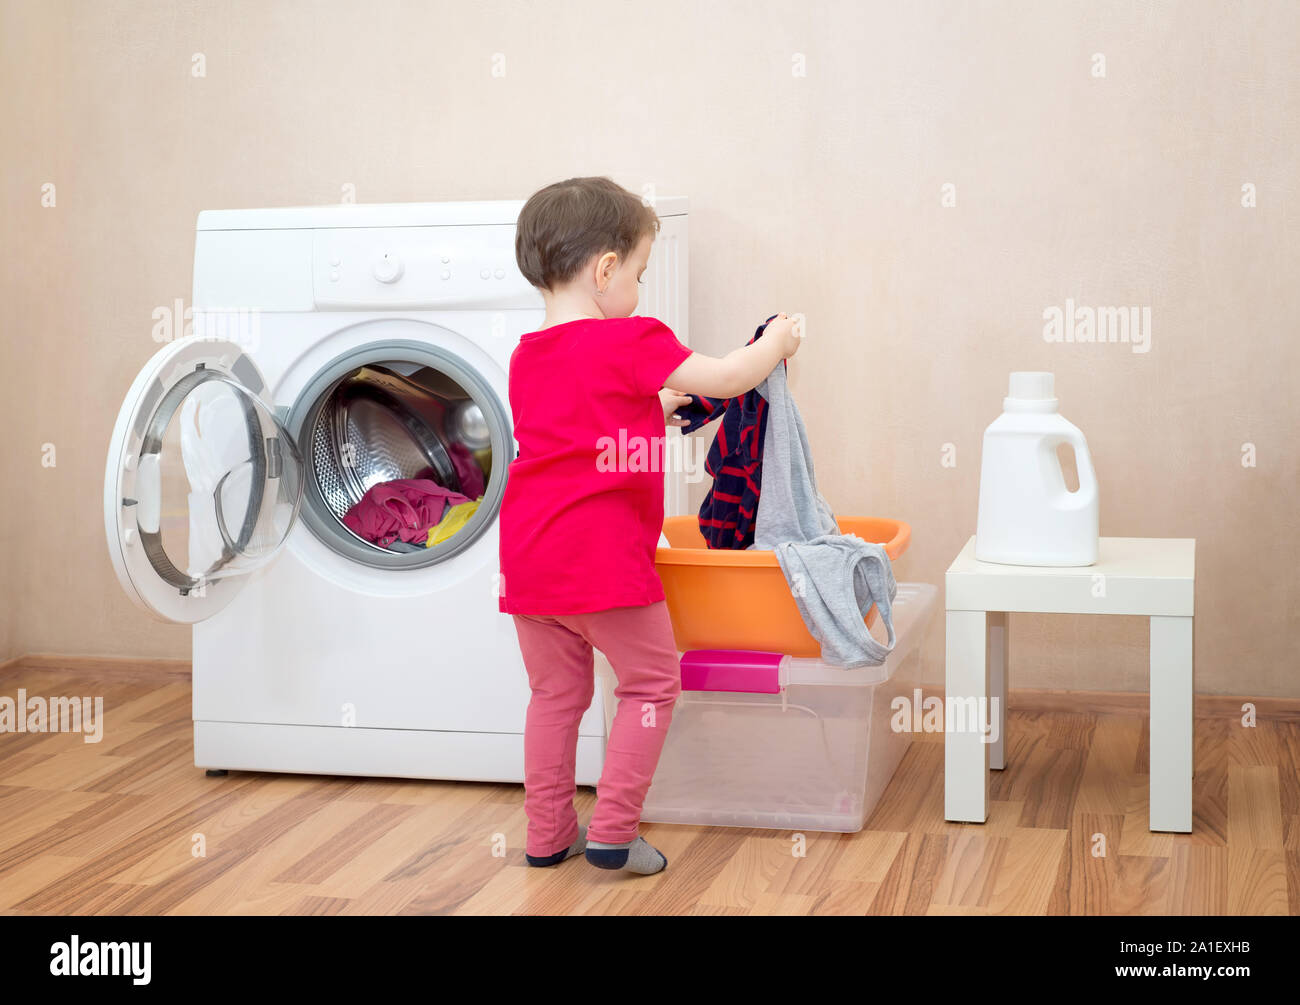 Little girl holding clothes near a washing machine Stock Photo